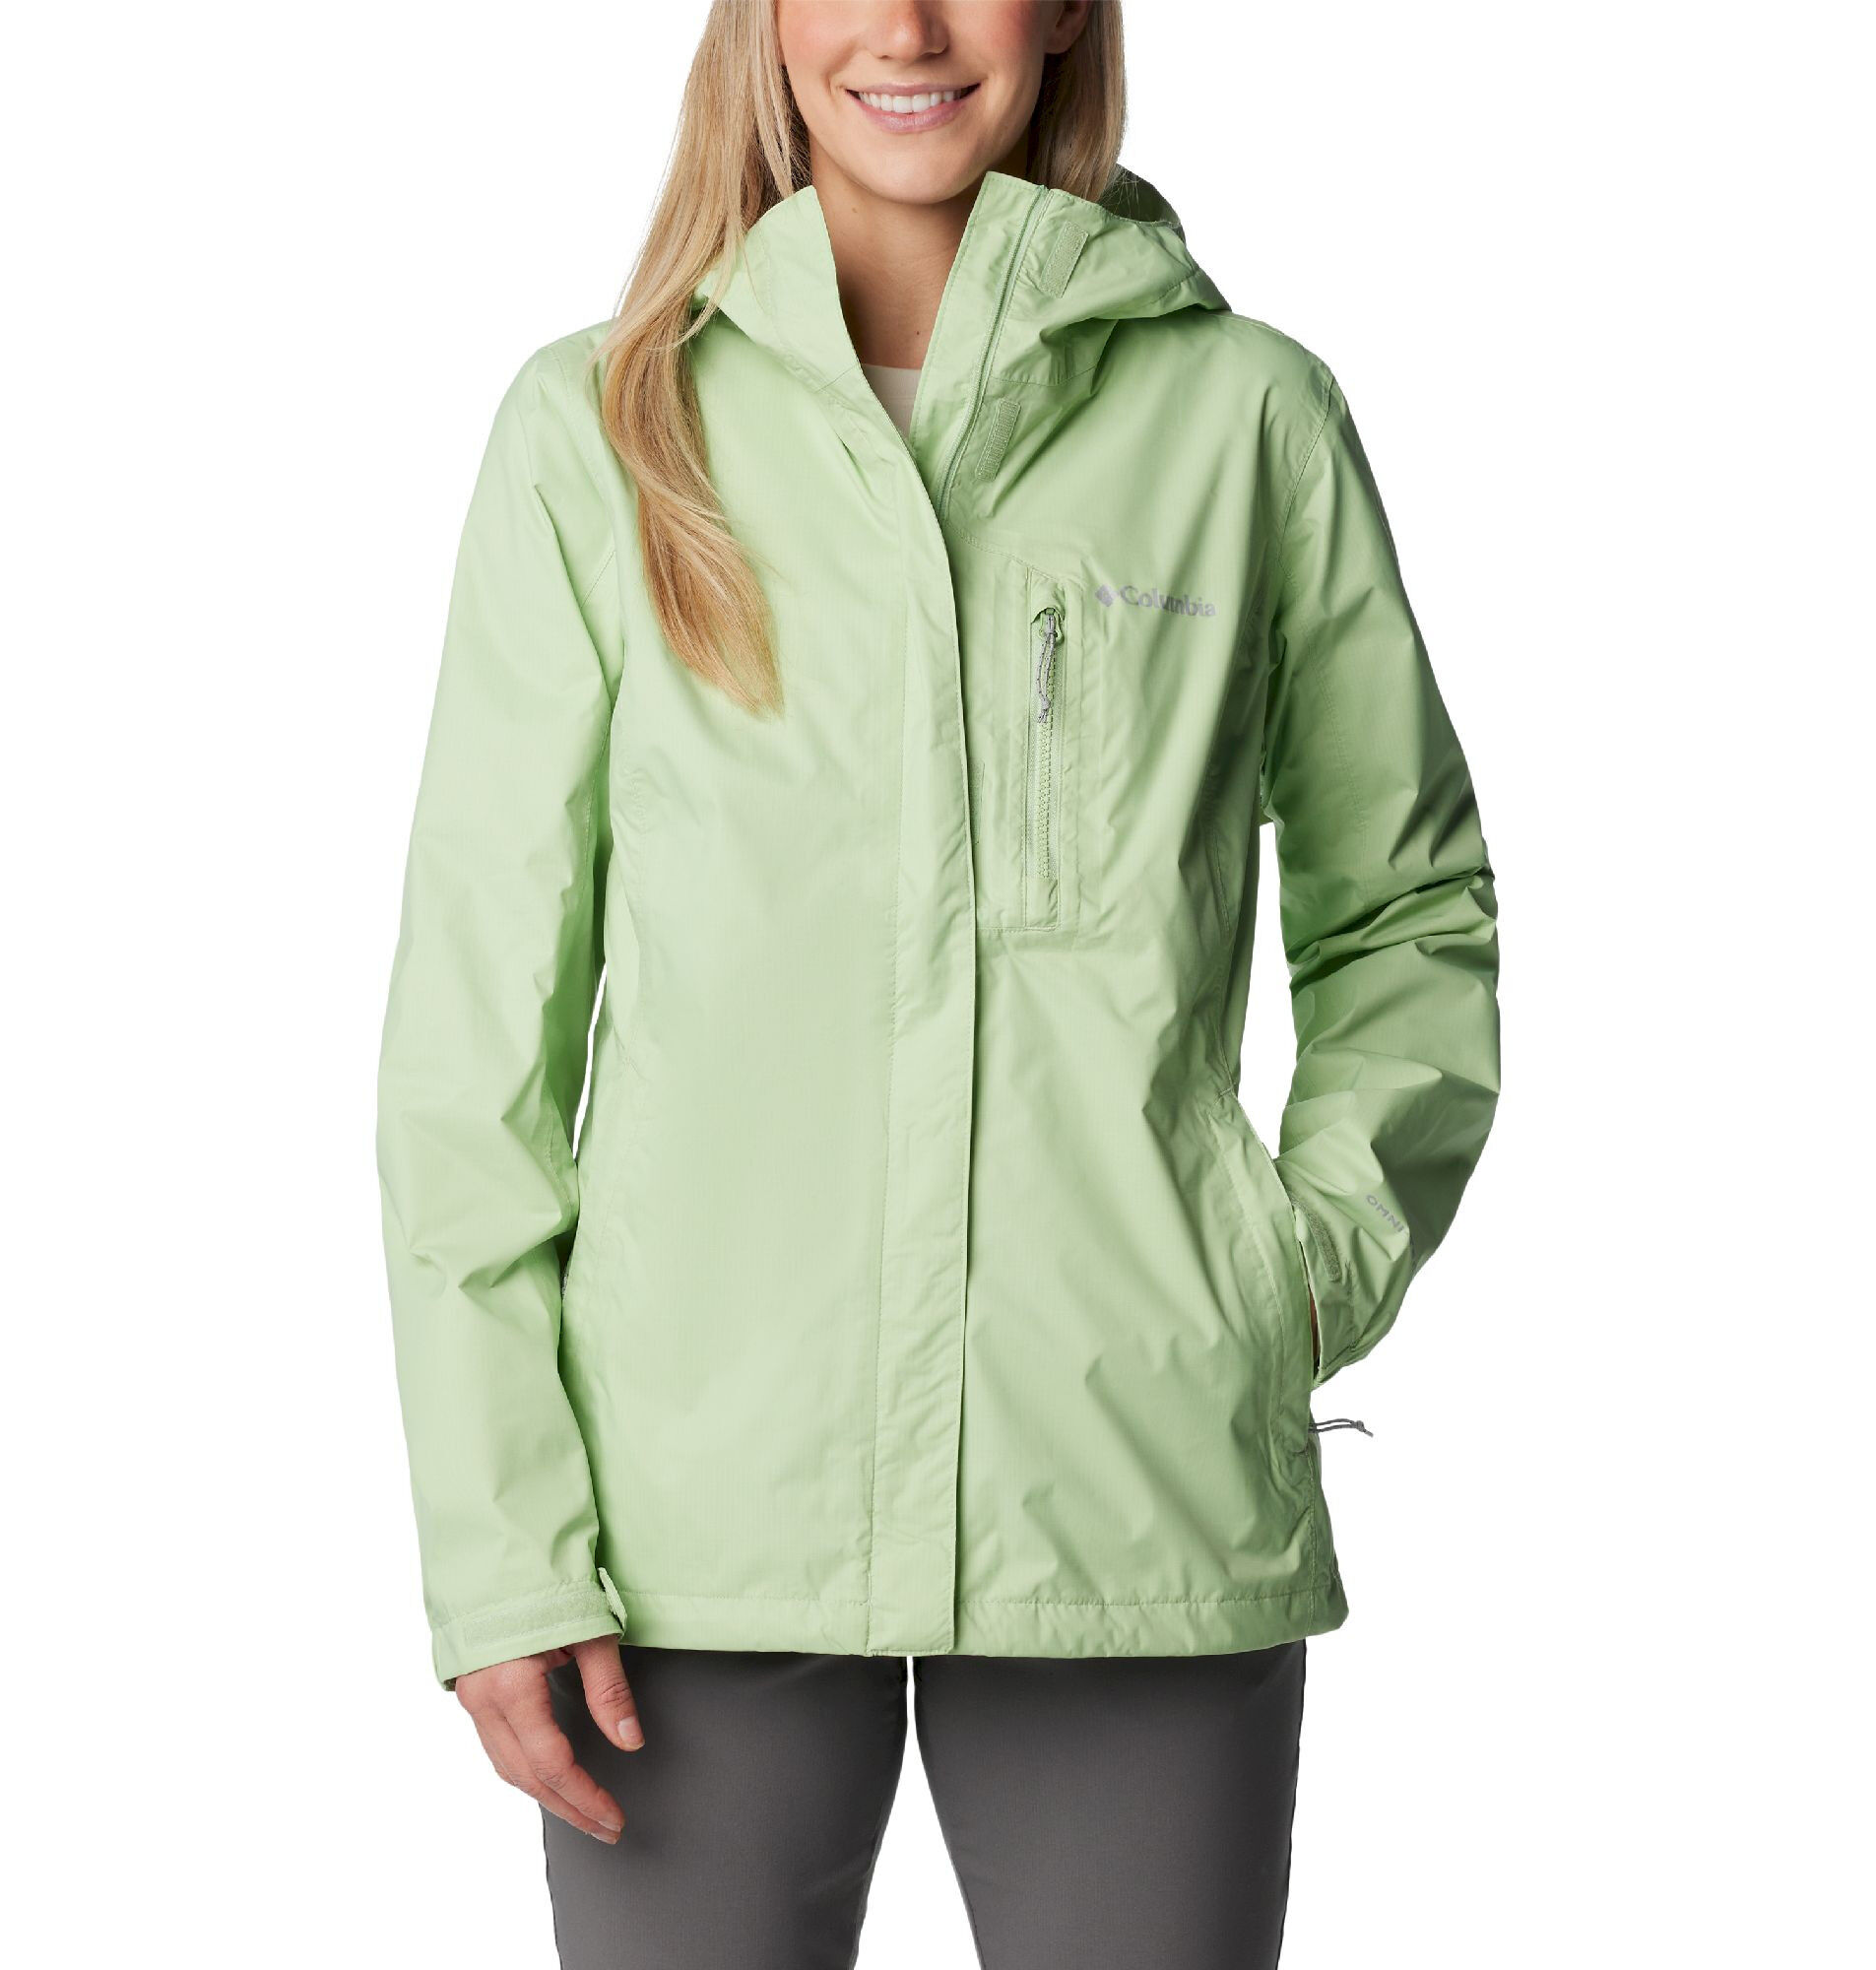 Columbia Pouring Adventure II Jacket - Chaqueta impermeable - Mujer